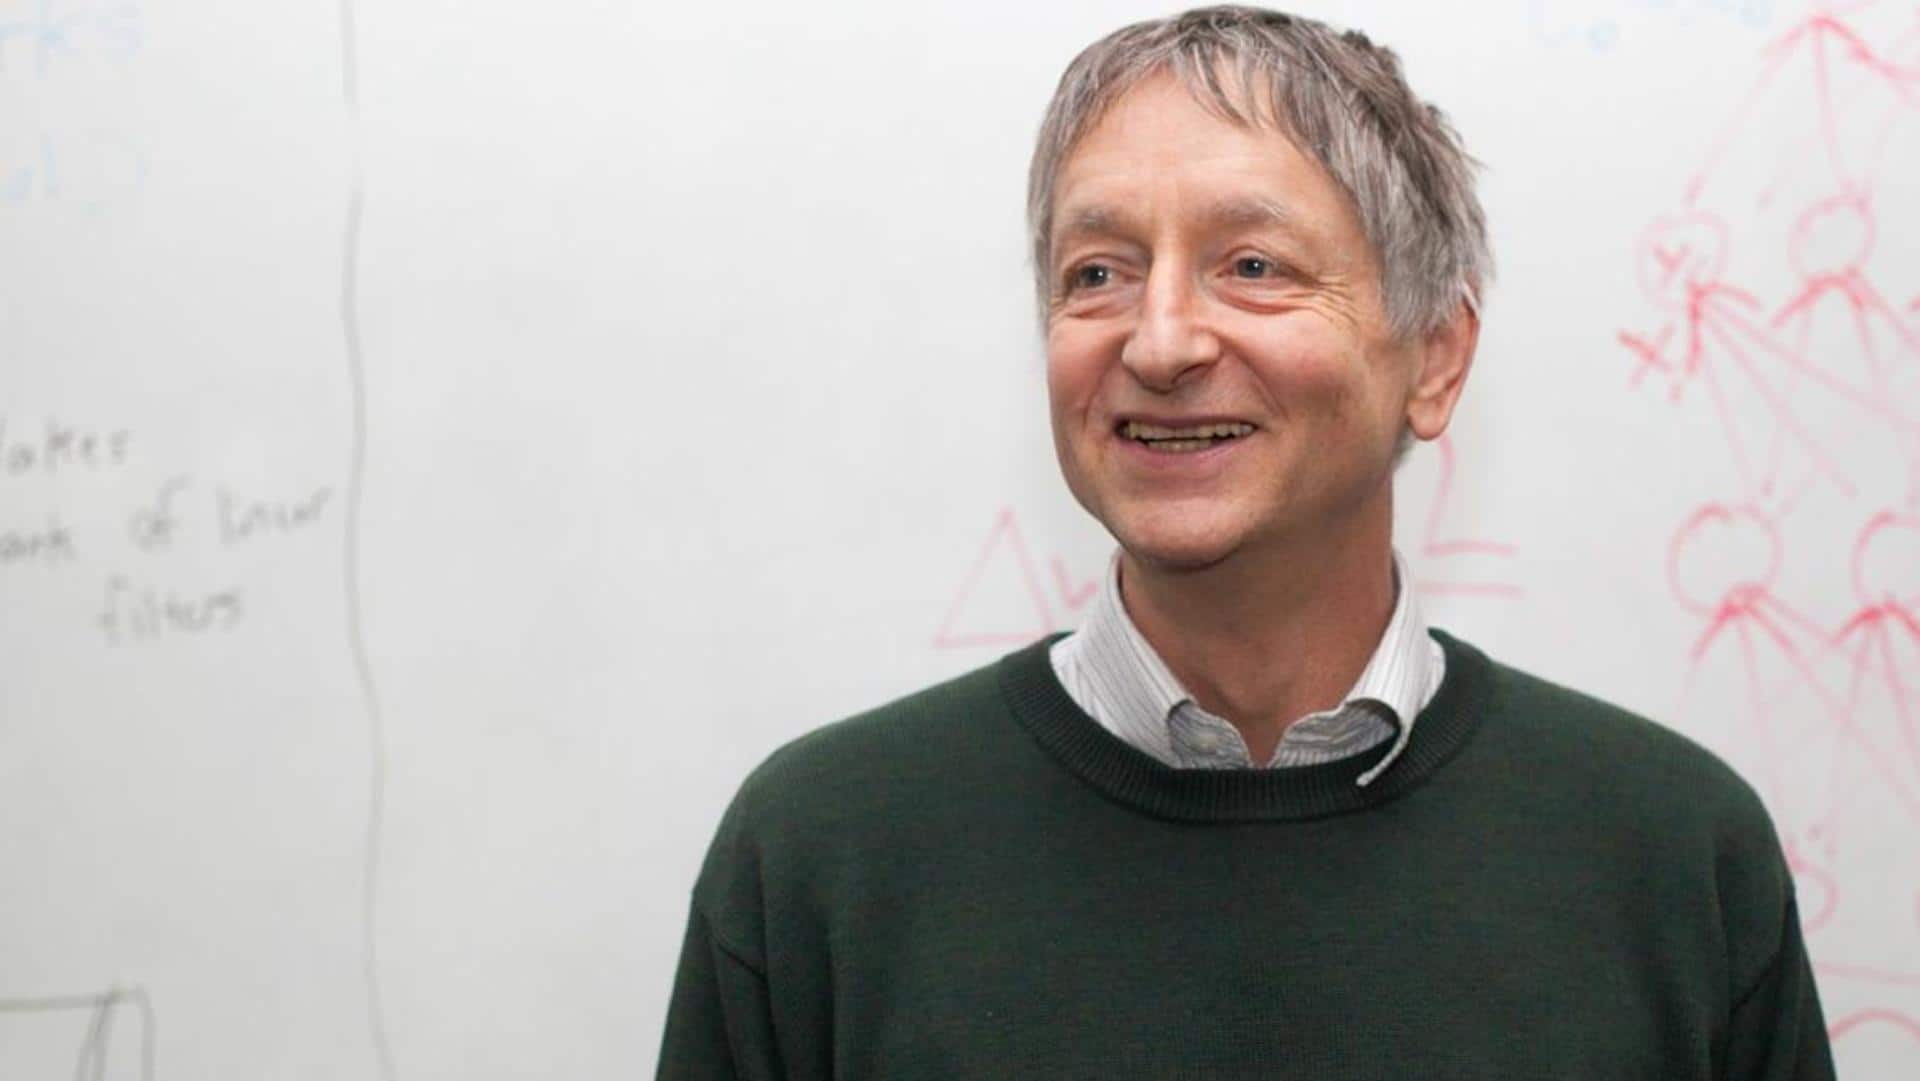 'Godfather of AI' Geoffrey Hinton leaves Google: His incredible contributions